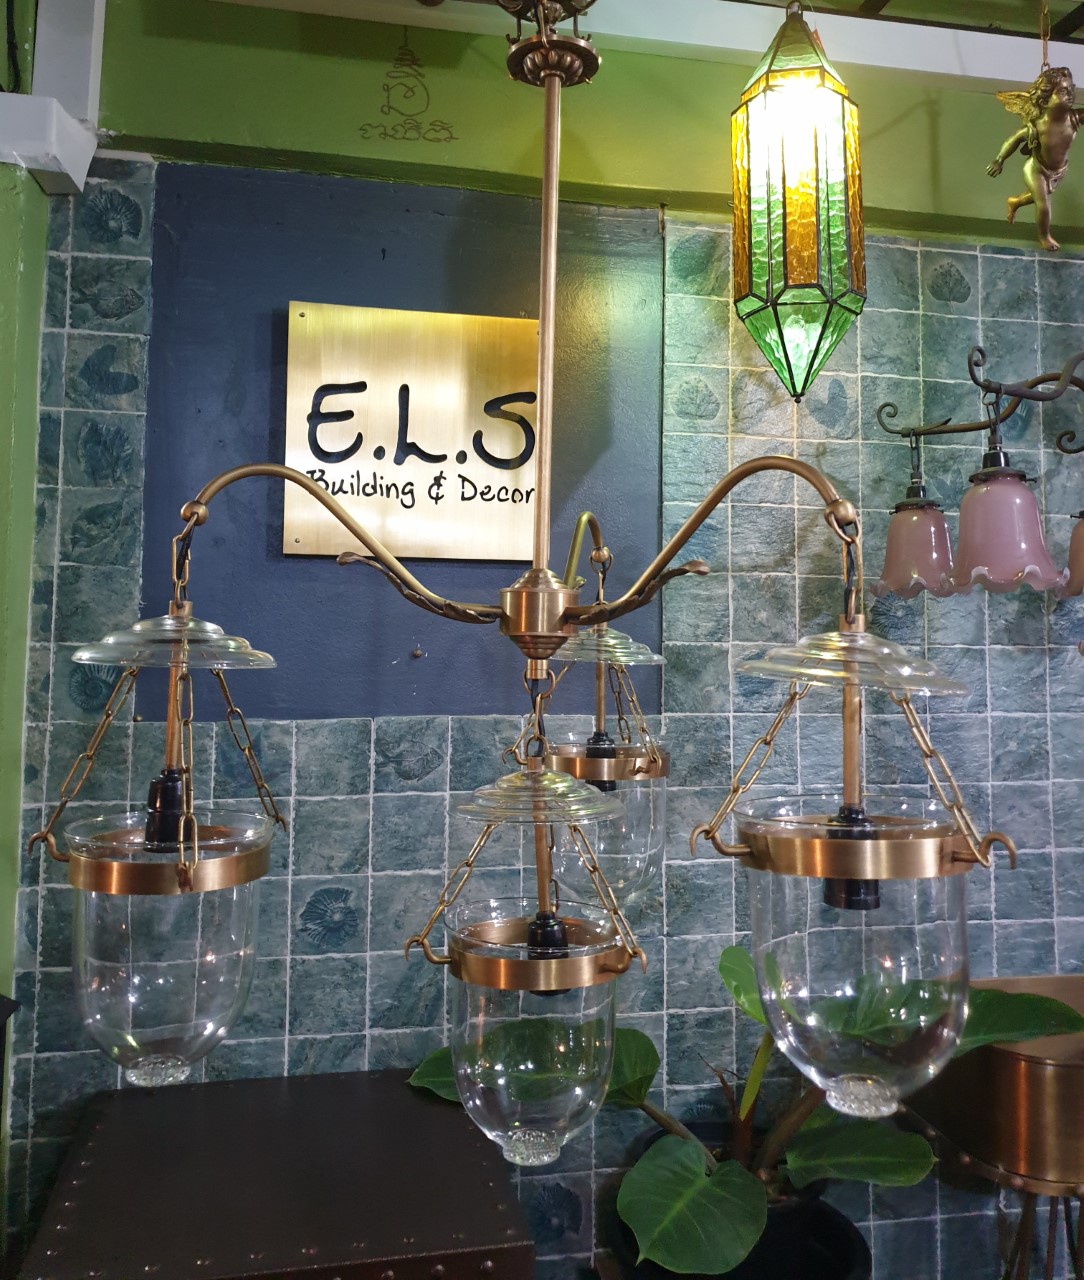 Hanging Lamp brass with clear U glass Item Code HGLU5 size glass 5'' wide 600 mm.long total 860 mm.